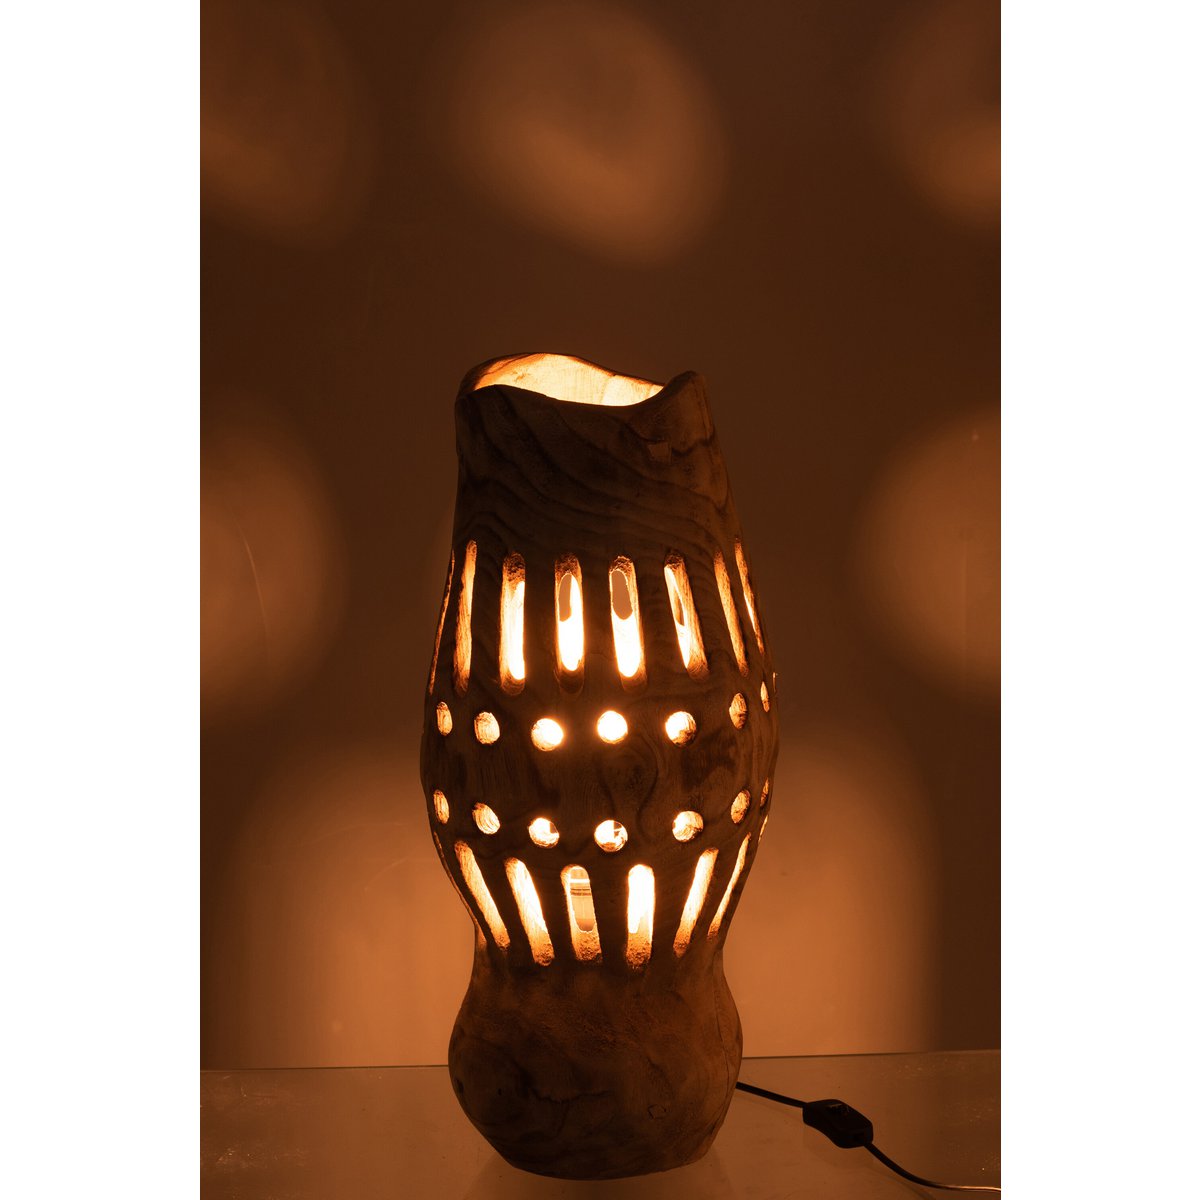 Wooden table lamp - Gypsy 2